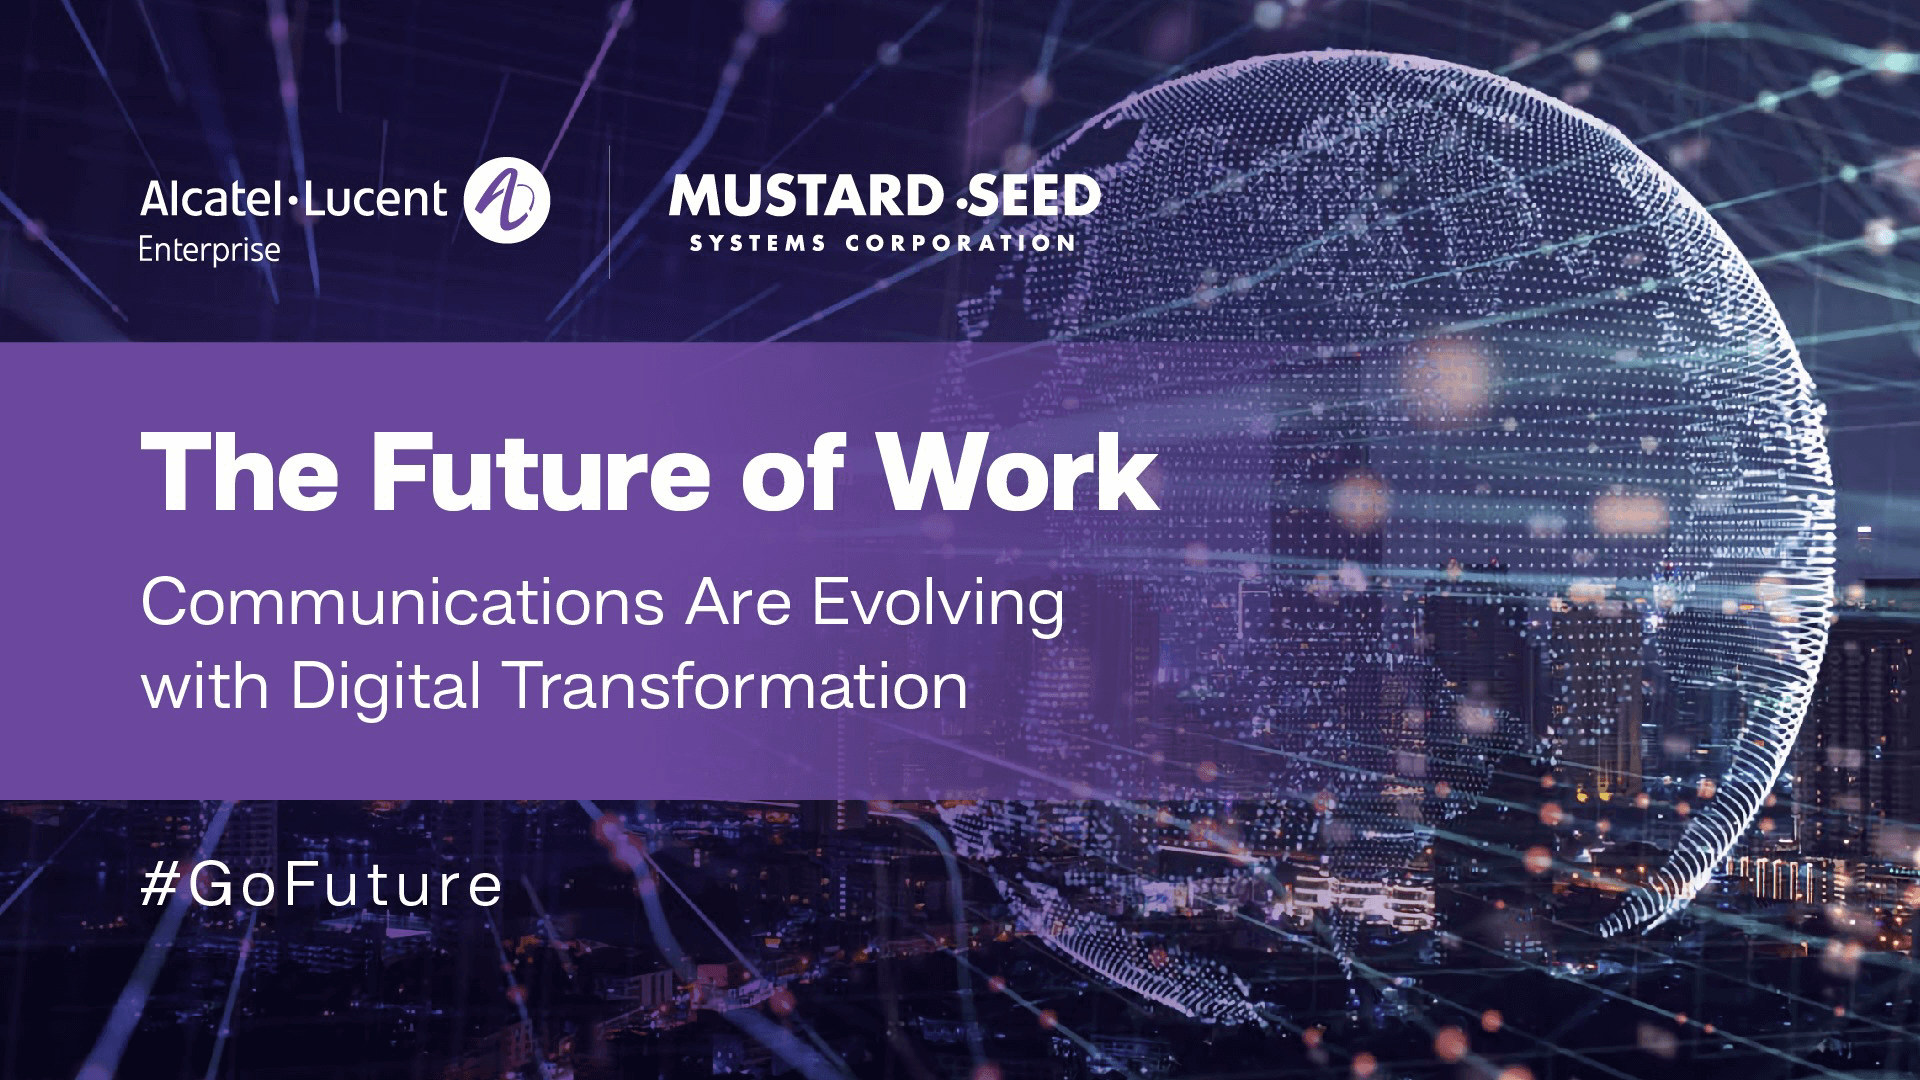 You are currently viewing Mustard Seed Systems Corporation and Alcatel Lucent Enterprise Announce Strategic Partnership